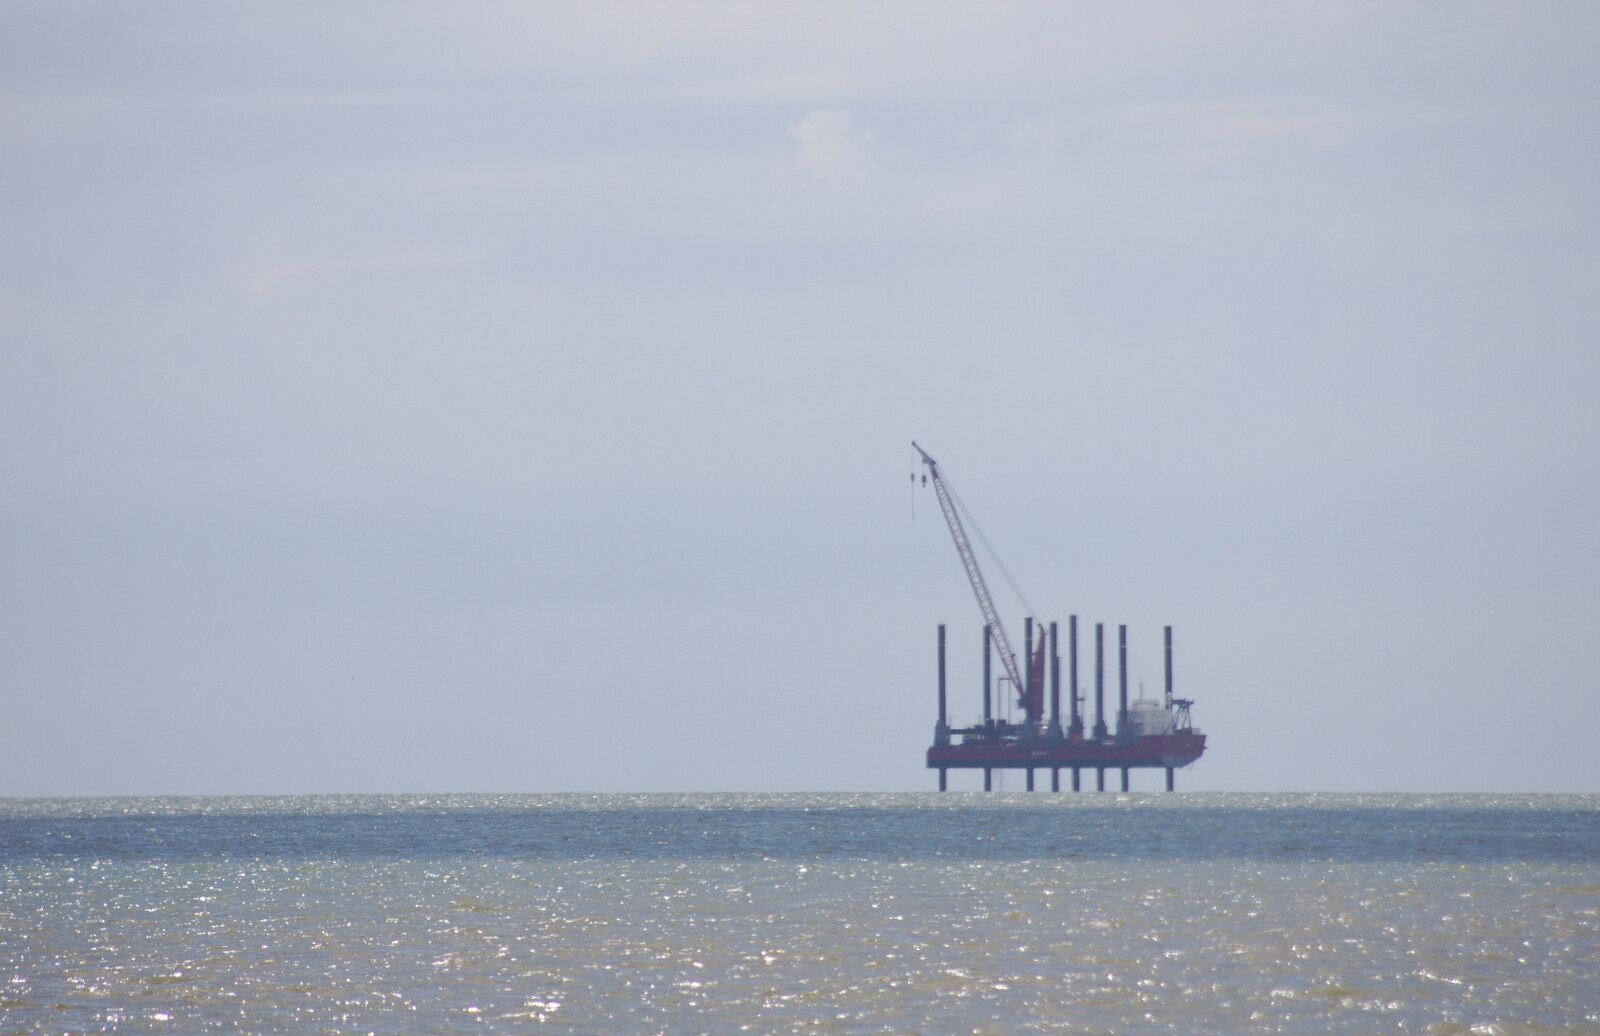 A ship-based oil rig thing at sea from Cliff House Camping, Dunwich, Suffolk - 15th June 2019